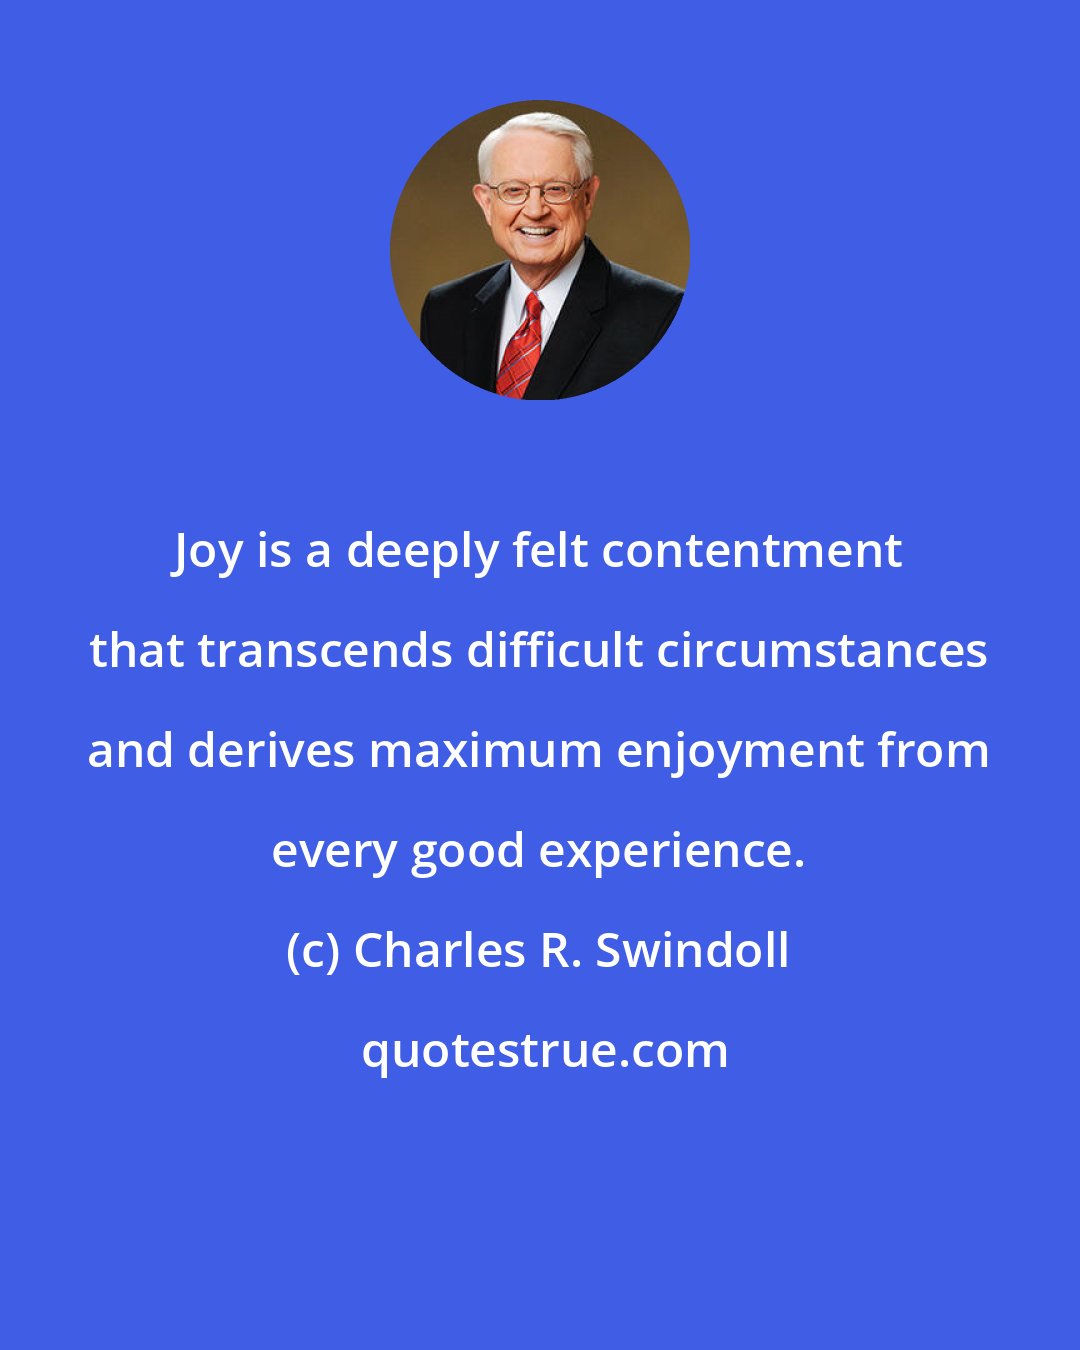 Charles R. Swindoll: Joy is a deeply felt contentment that transcends difficult circumstances and derives maximum enjoyment from every good experience.